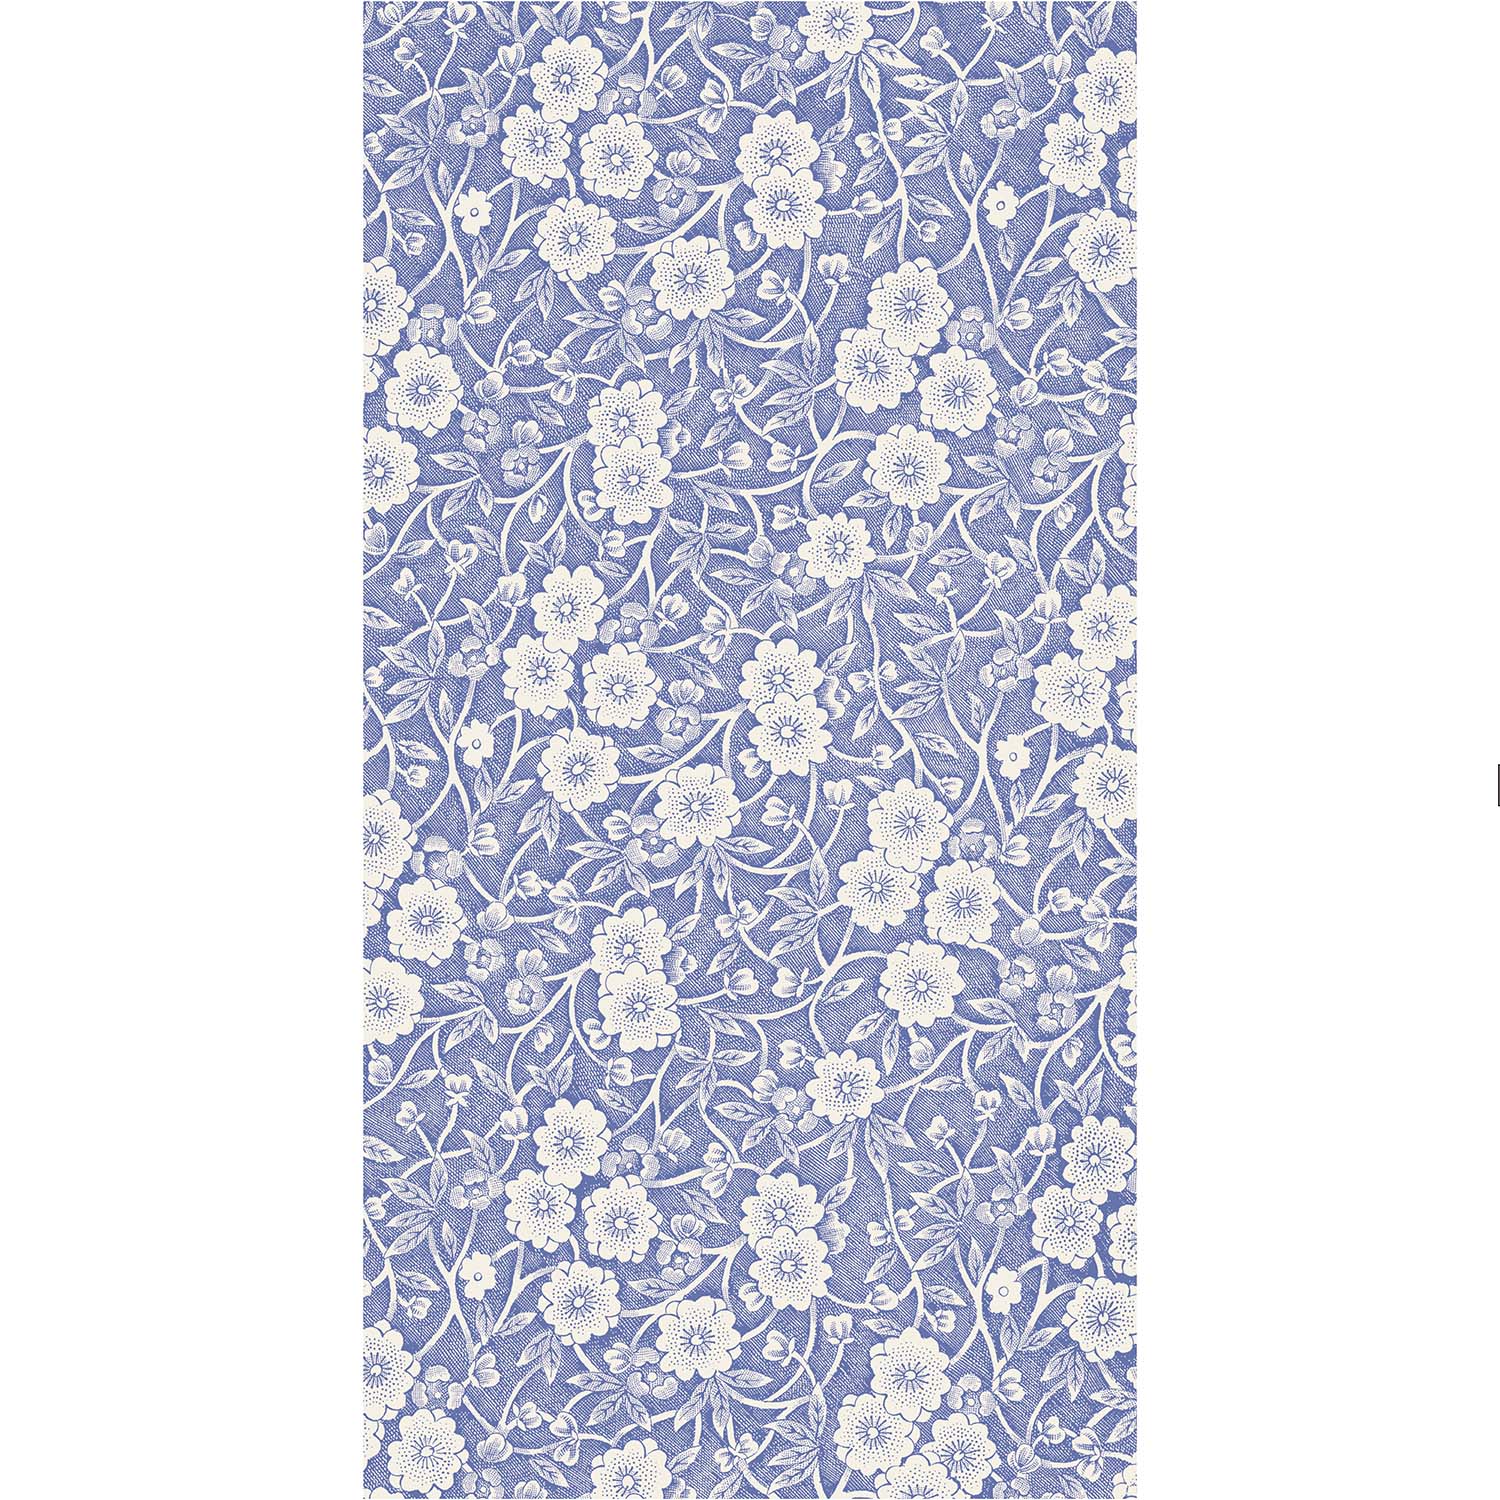 A rectangle guest napkin featuring a dense pattern of white flowers, stems and leaves on a medium blue background.